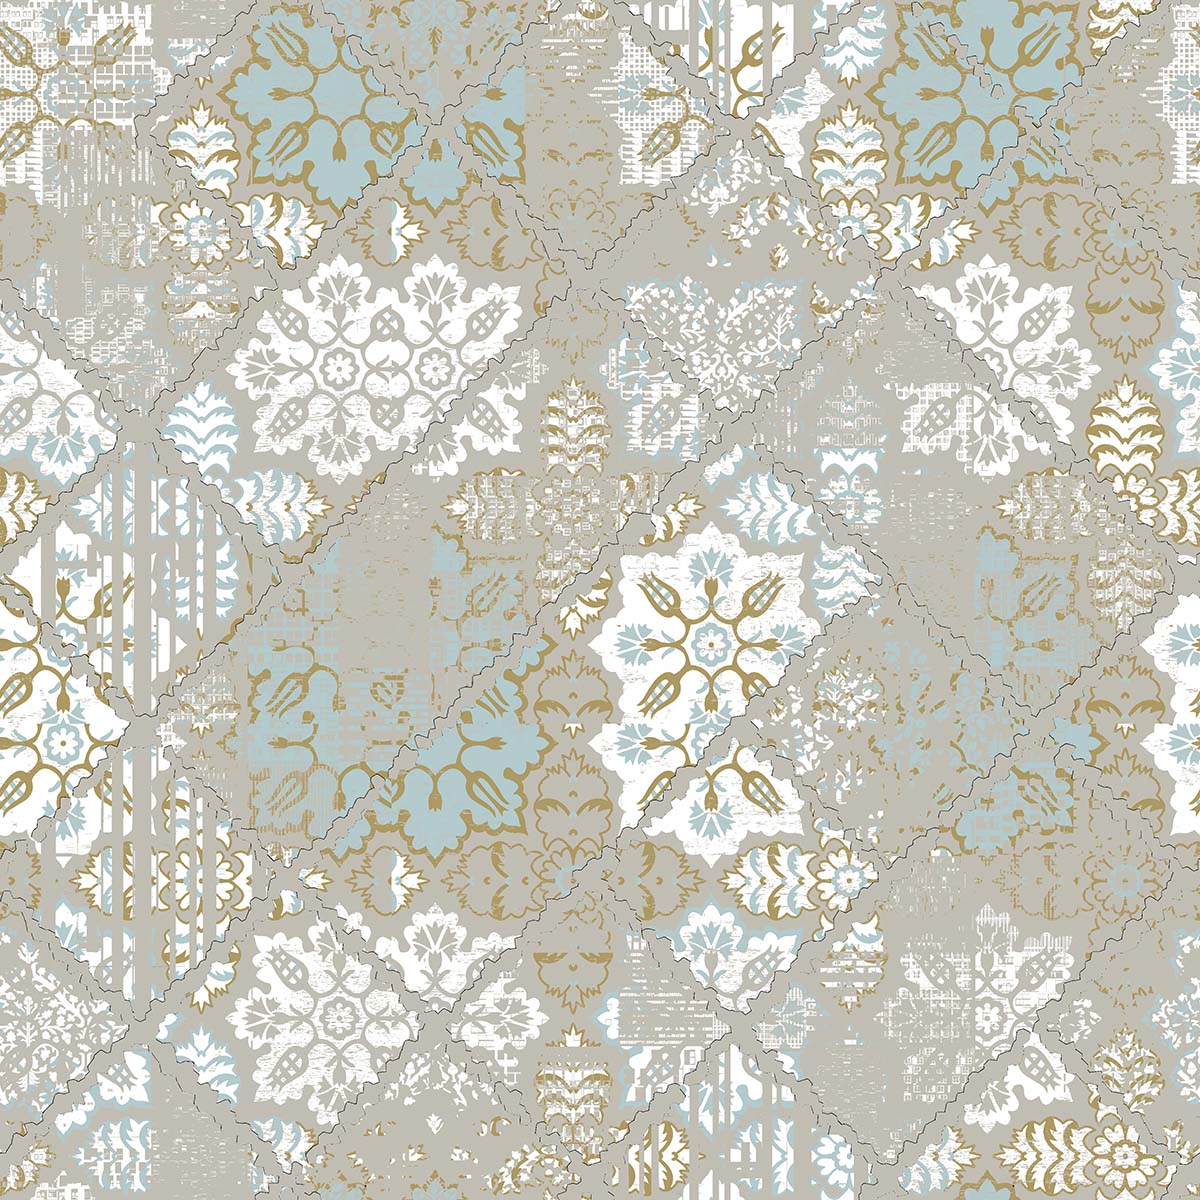 A pattern of flowers and leaves